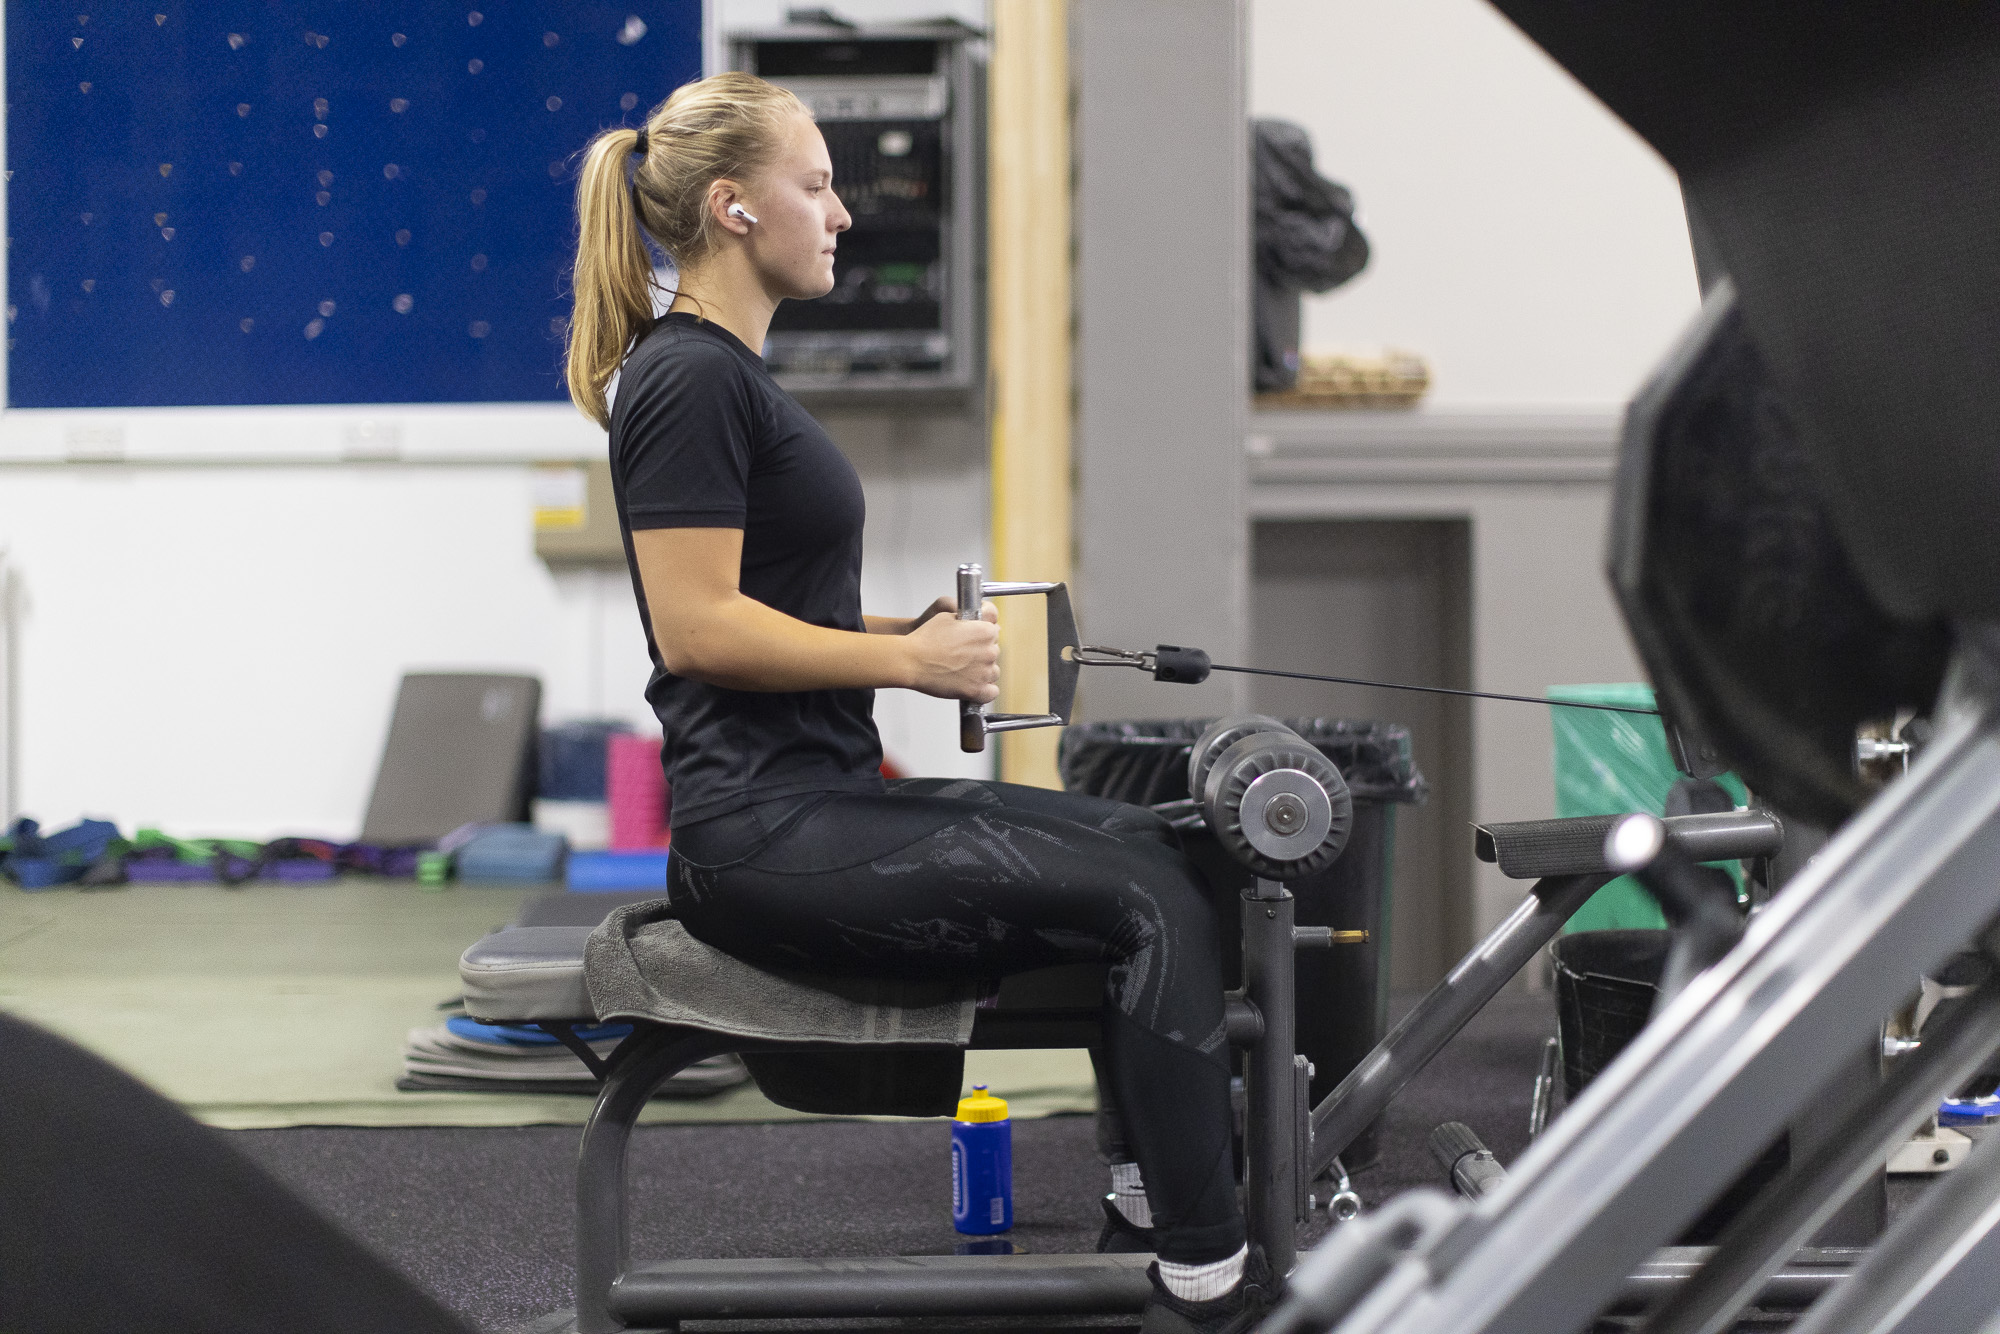 student using a machine at the ASU gym